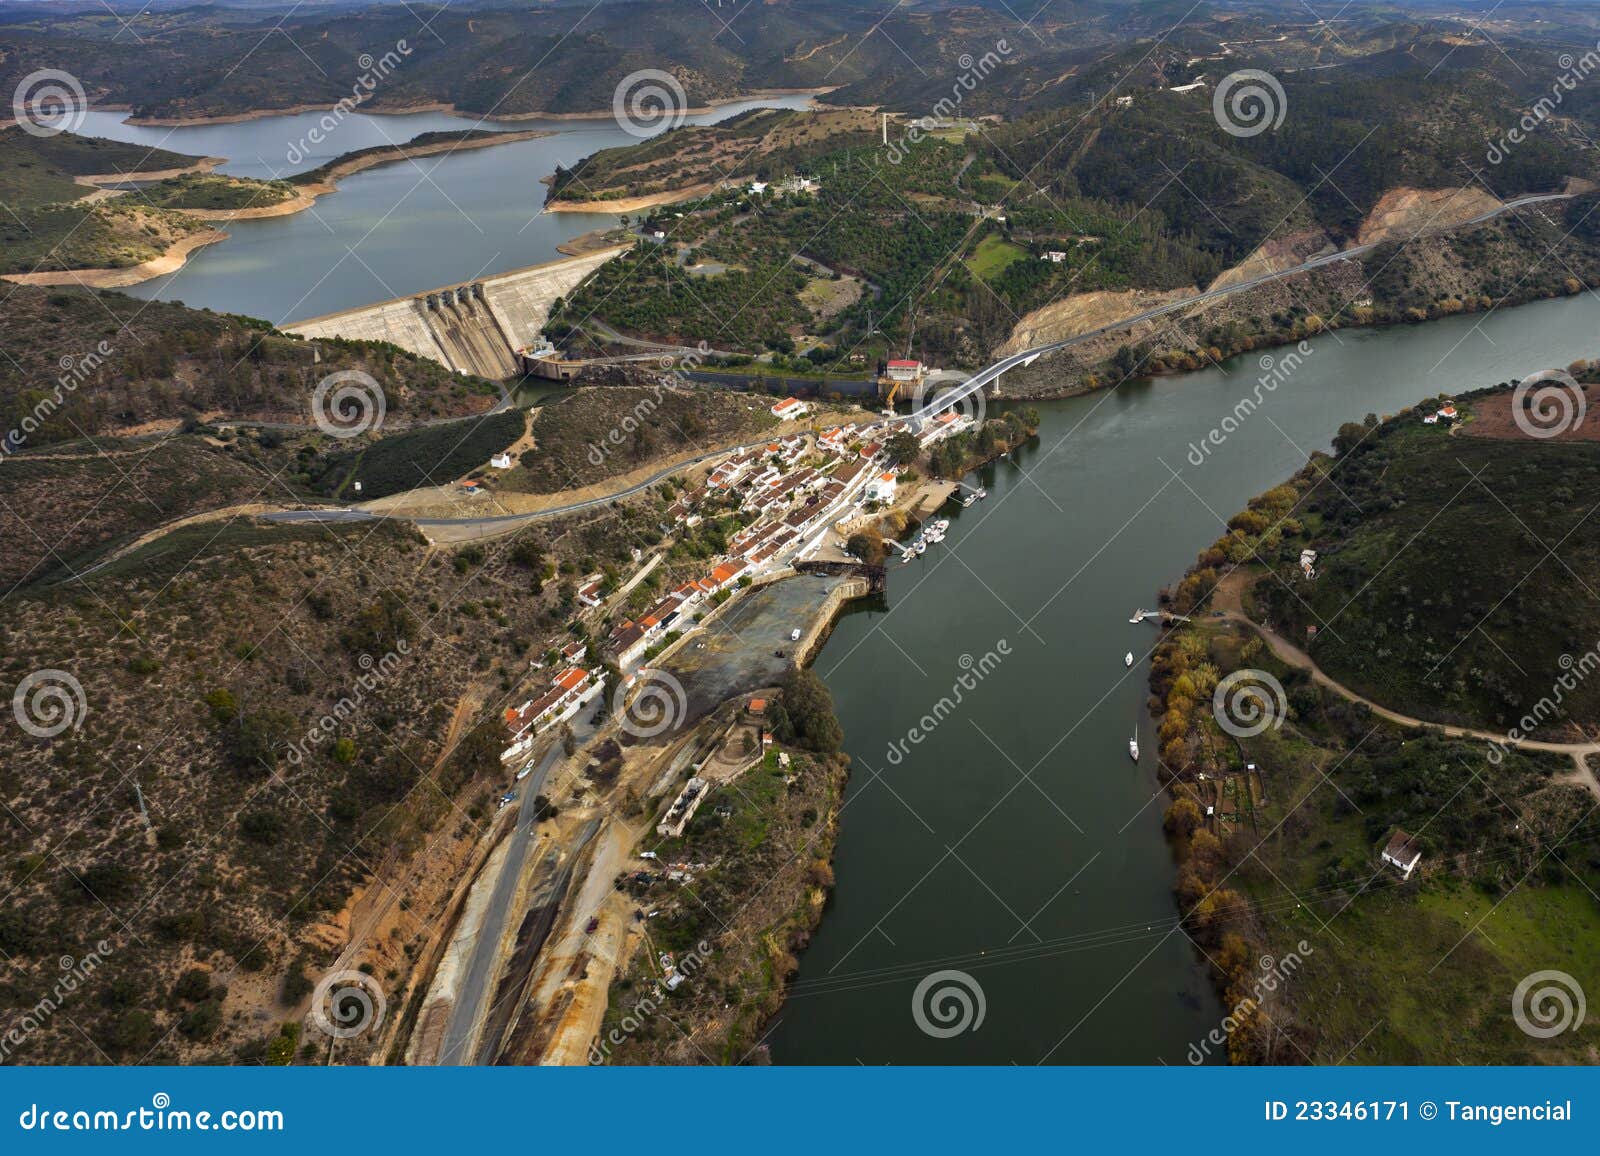 aerial view of the river guadiana